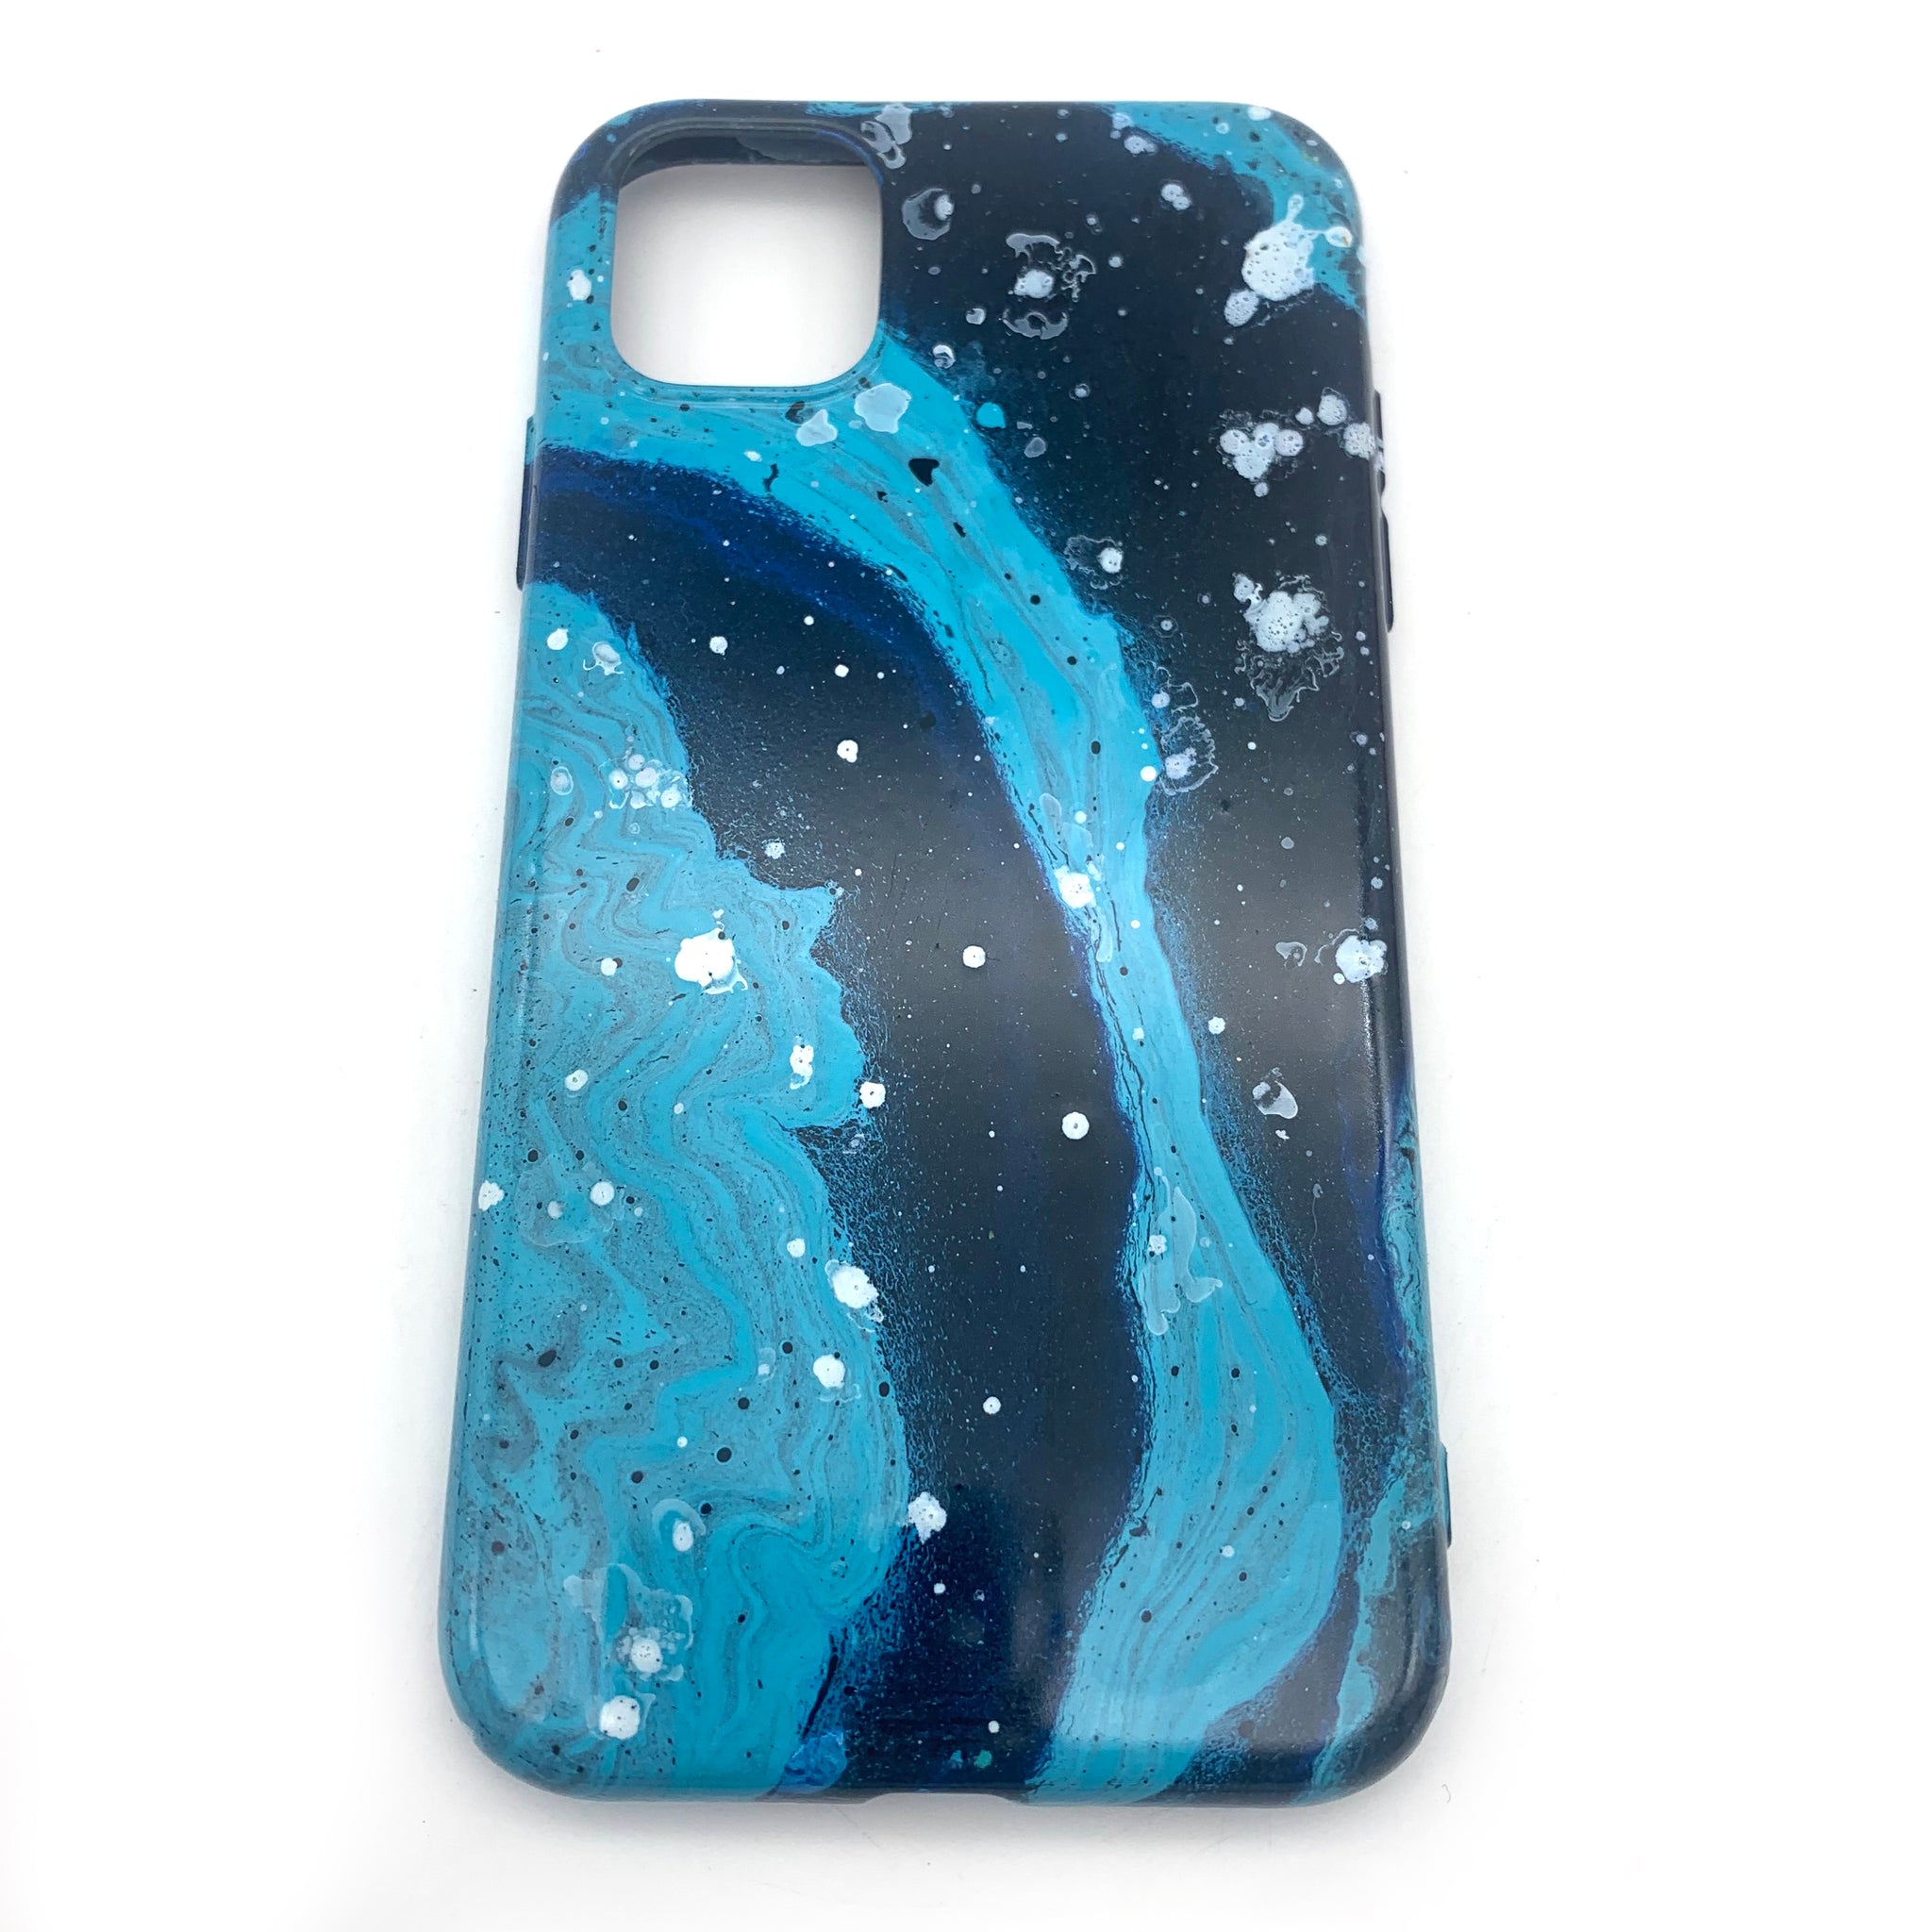 Hydro Dipped Phone Cases in Blue Black and White - iPhone 11